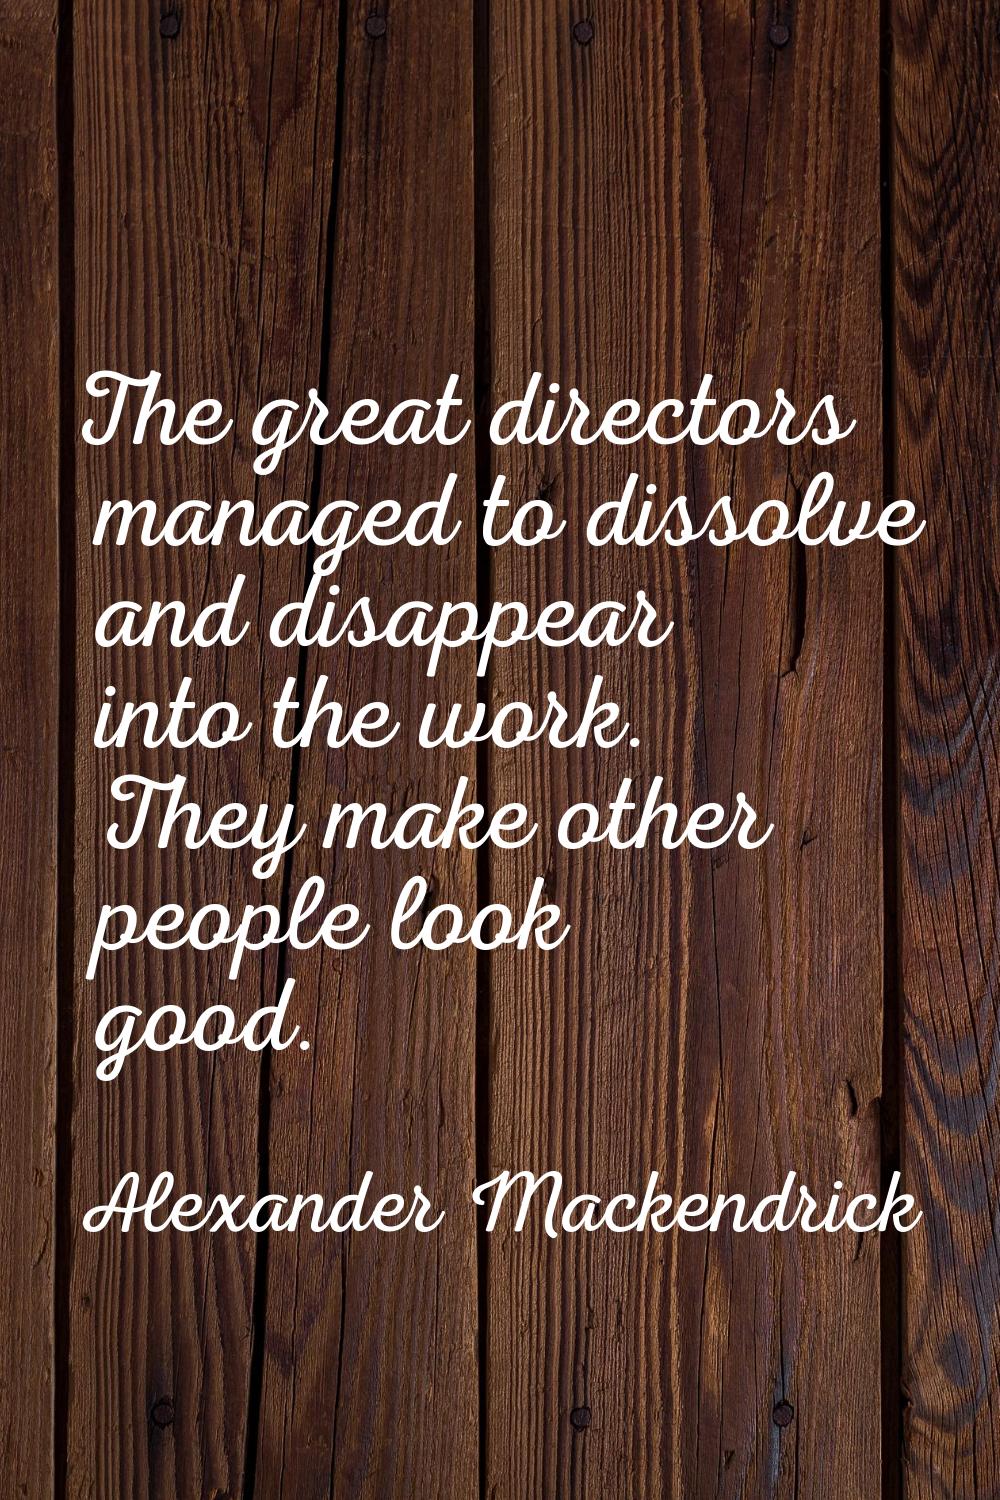 The great directors managed to dissolve and disappear into the work. They make other people look go